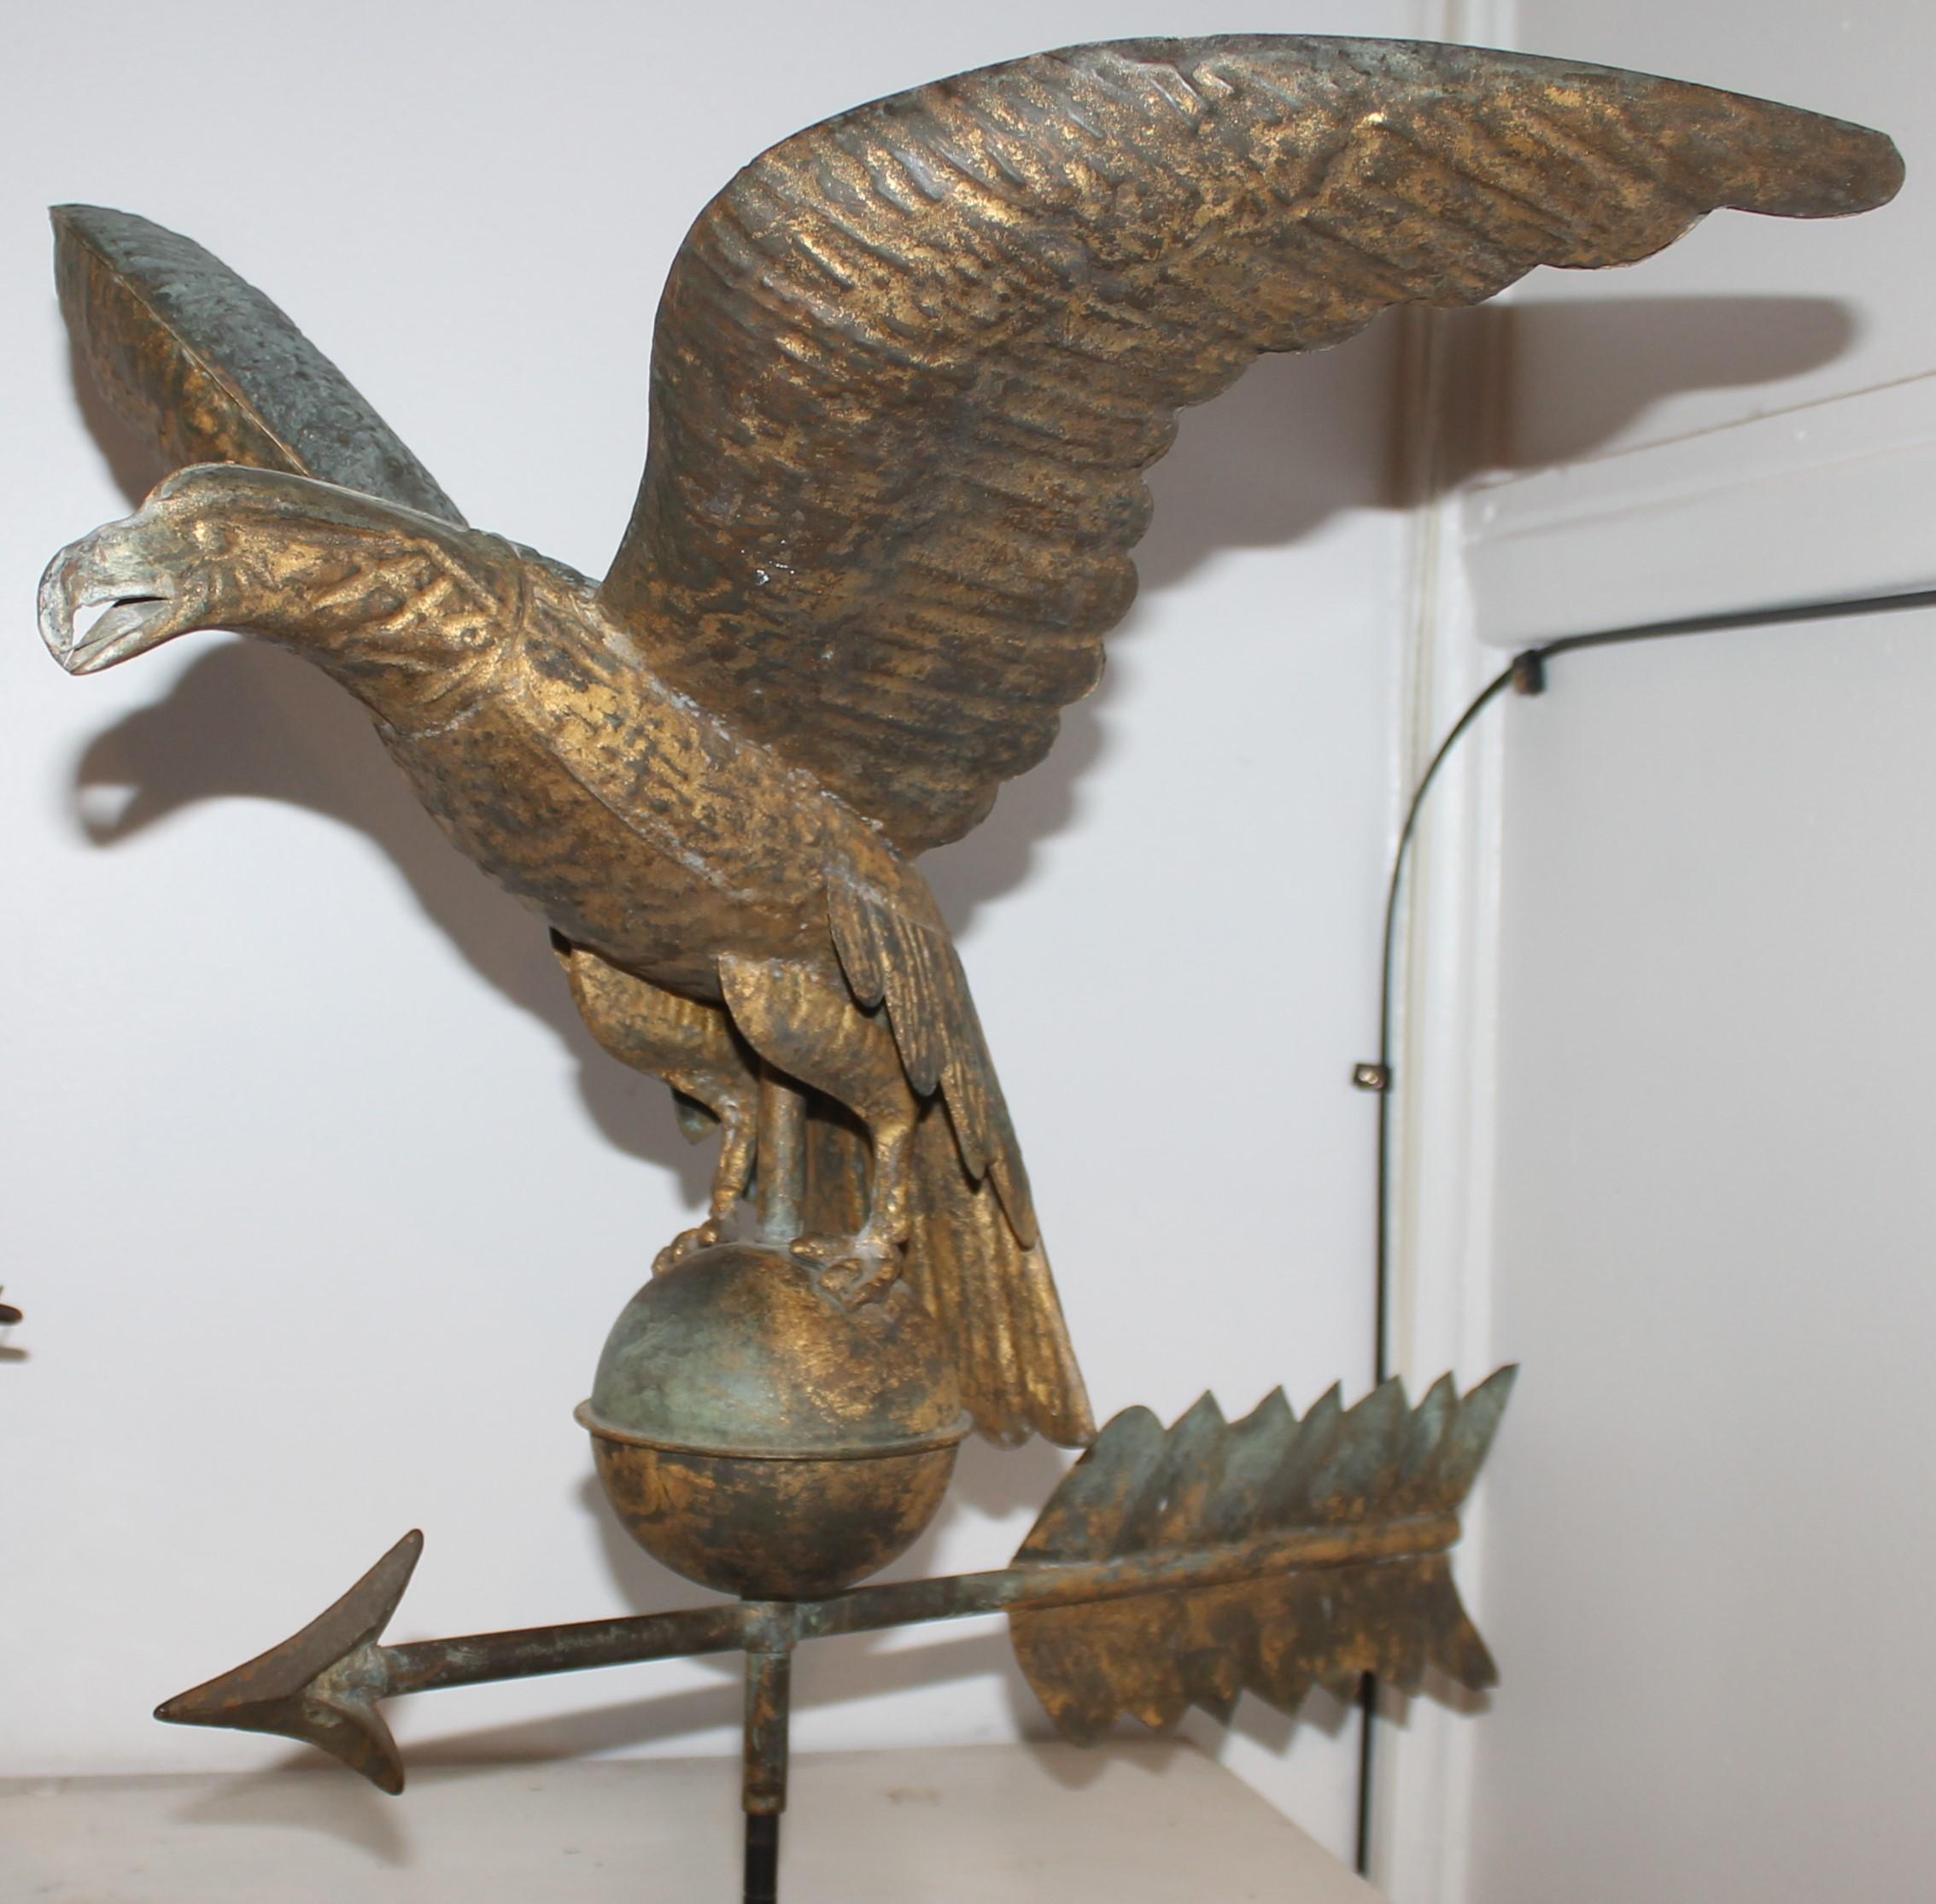 19th C original gilded surface full body eagle weather vane with the best undisturbed surface.The base is custom made iron stand.This eagle is attributed to Harris & Company.